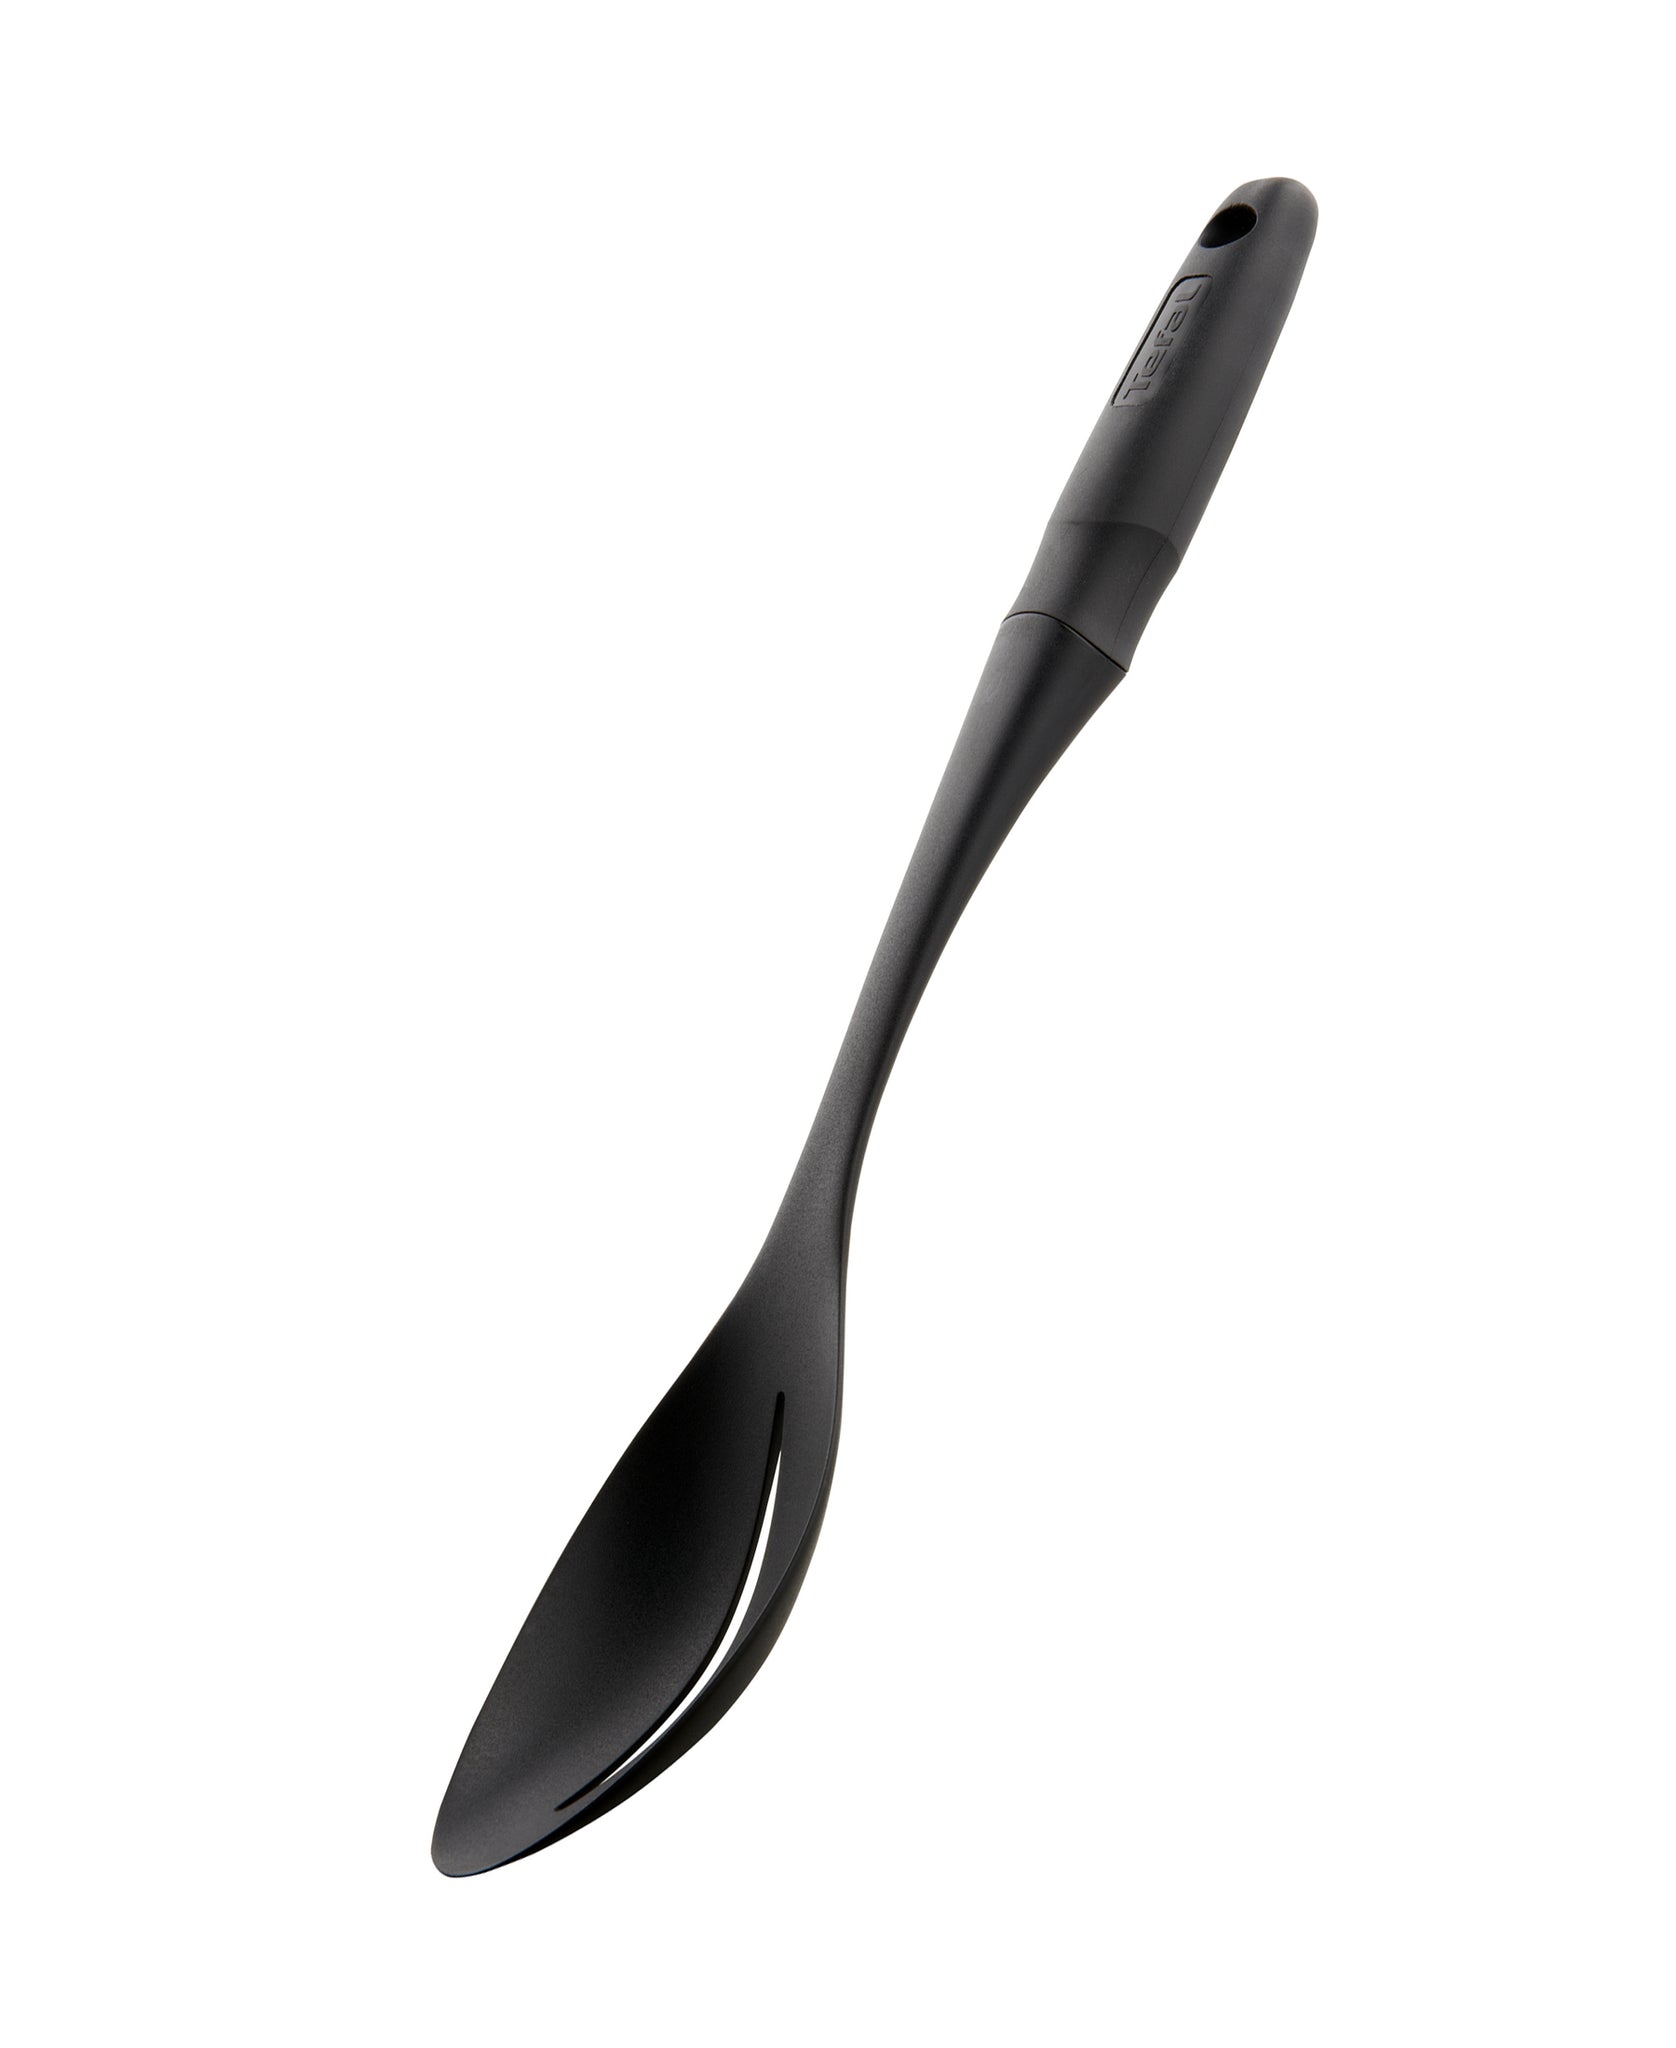 Tefal Comfort Touch Slotted Spoon - Black